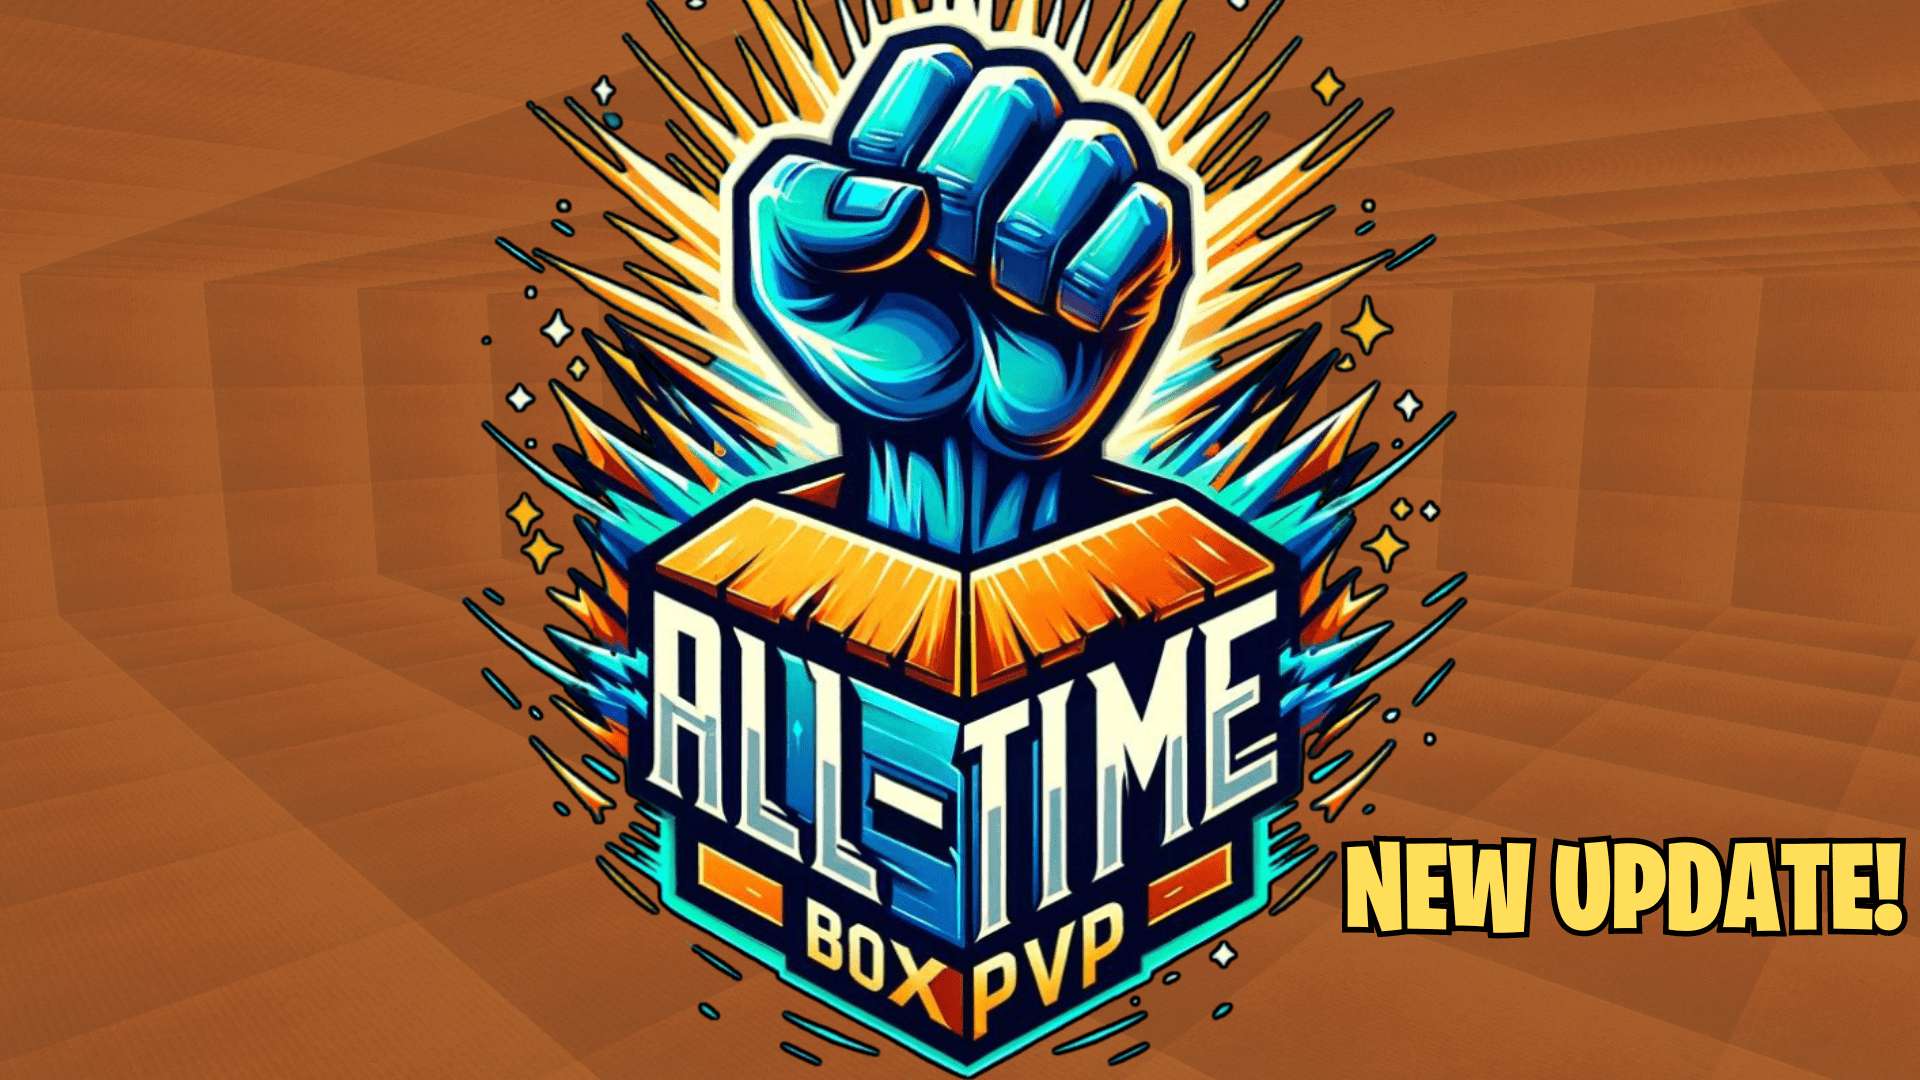 🏆All-Time Box PVP📦